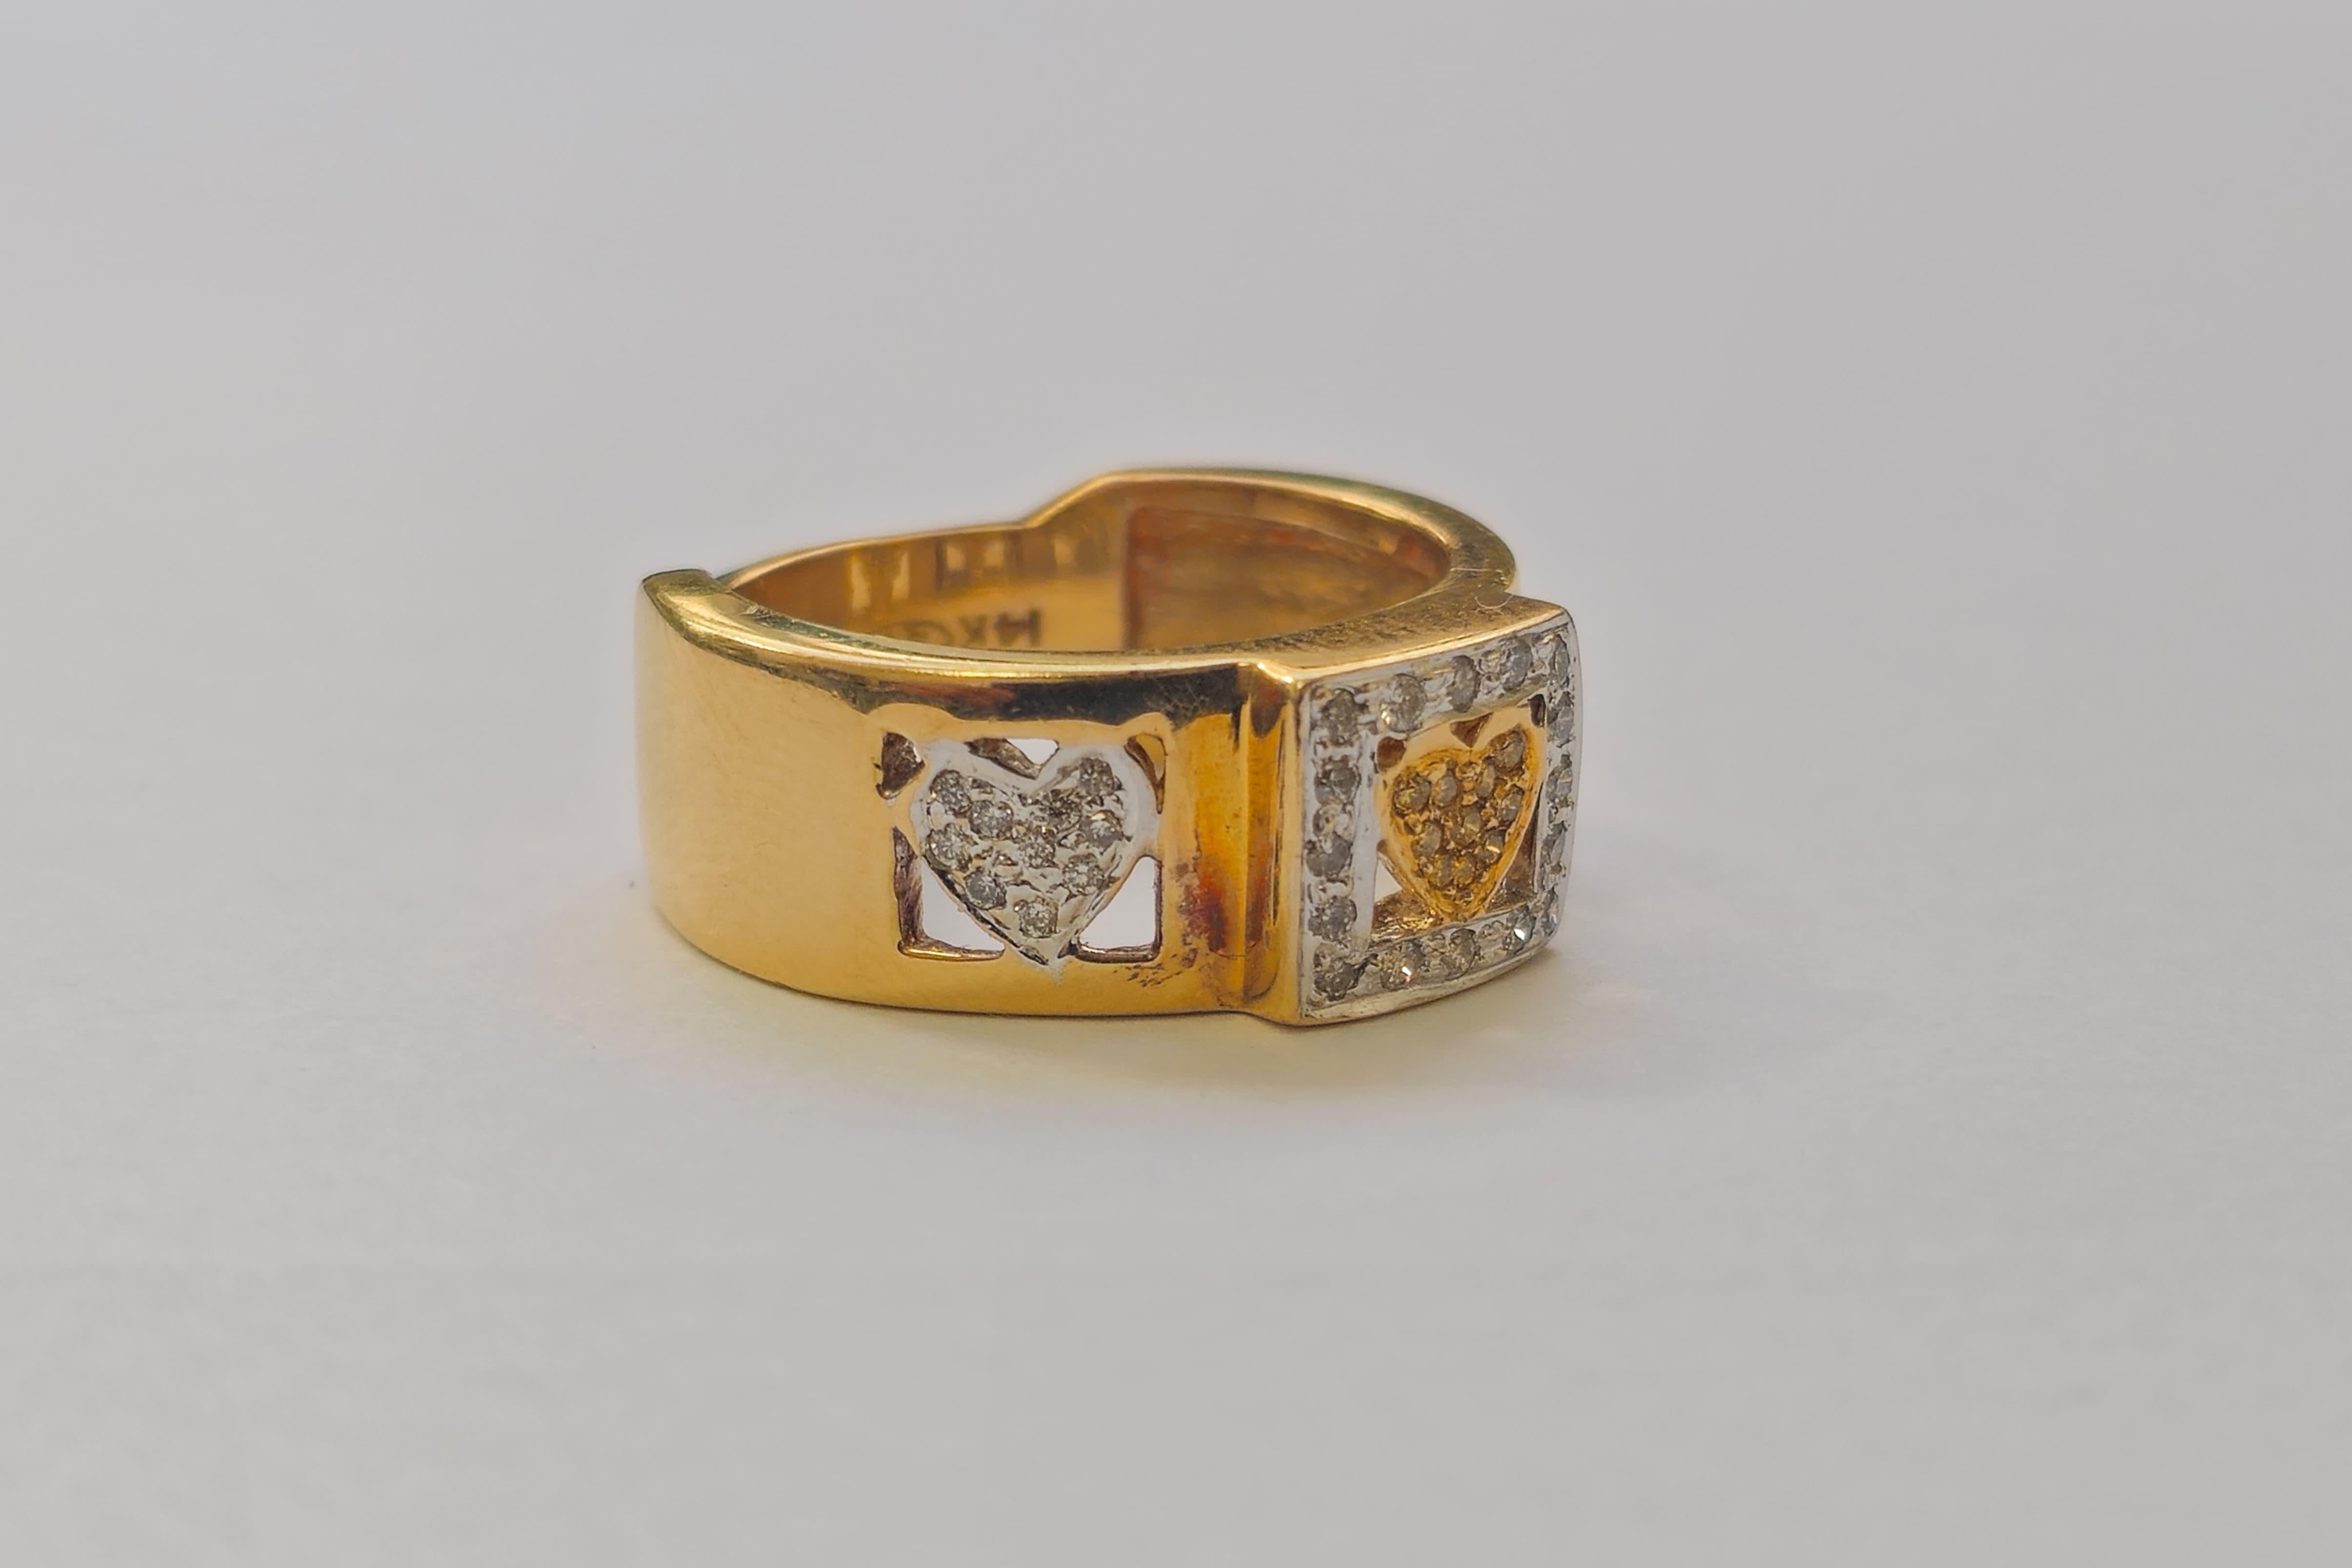 This 14k gold ring, weighing 8.2 grams, boasts a total of 0.30 carats of diamonds with SI1 clarity and G color, adding brilliance and sophistication. With a ring size of US 6.75, it offers a perfect fit for its wearer. The design exudes classic